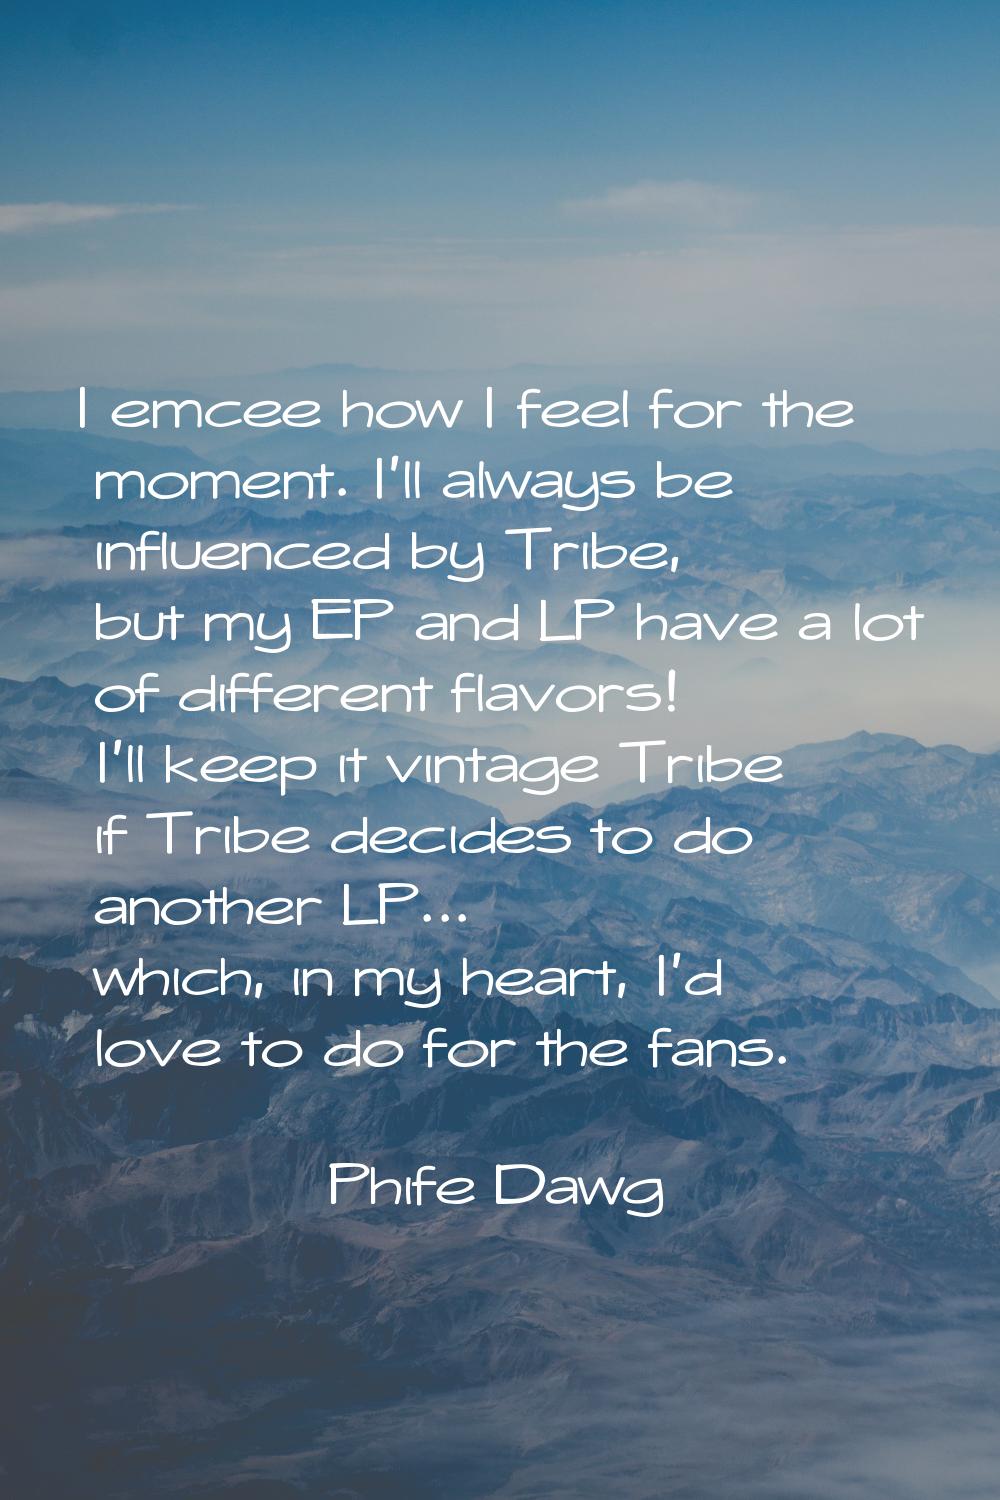 I emcee how I feel for the moment. I'll always be influenced by Tribe, but my EP and LP have a lot 